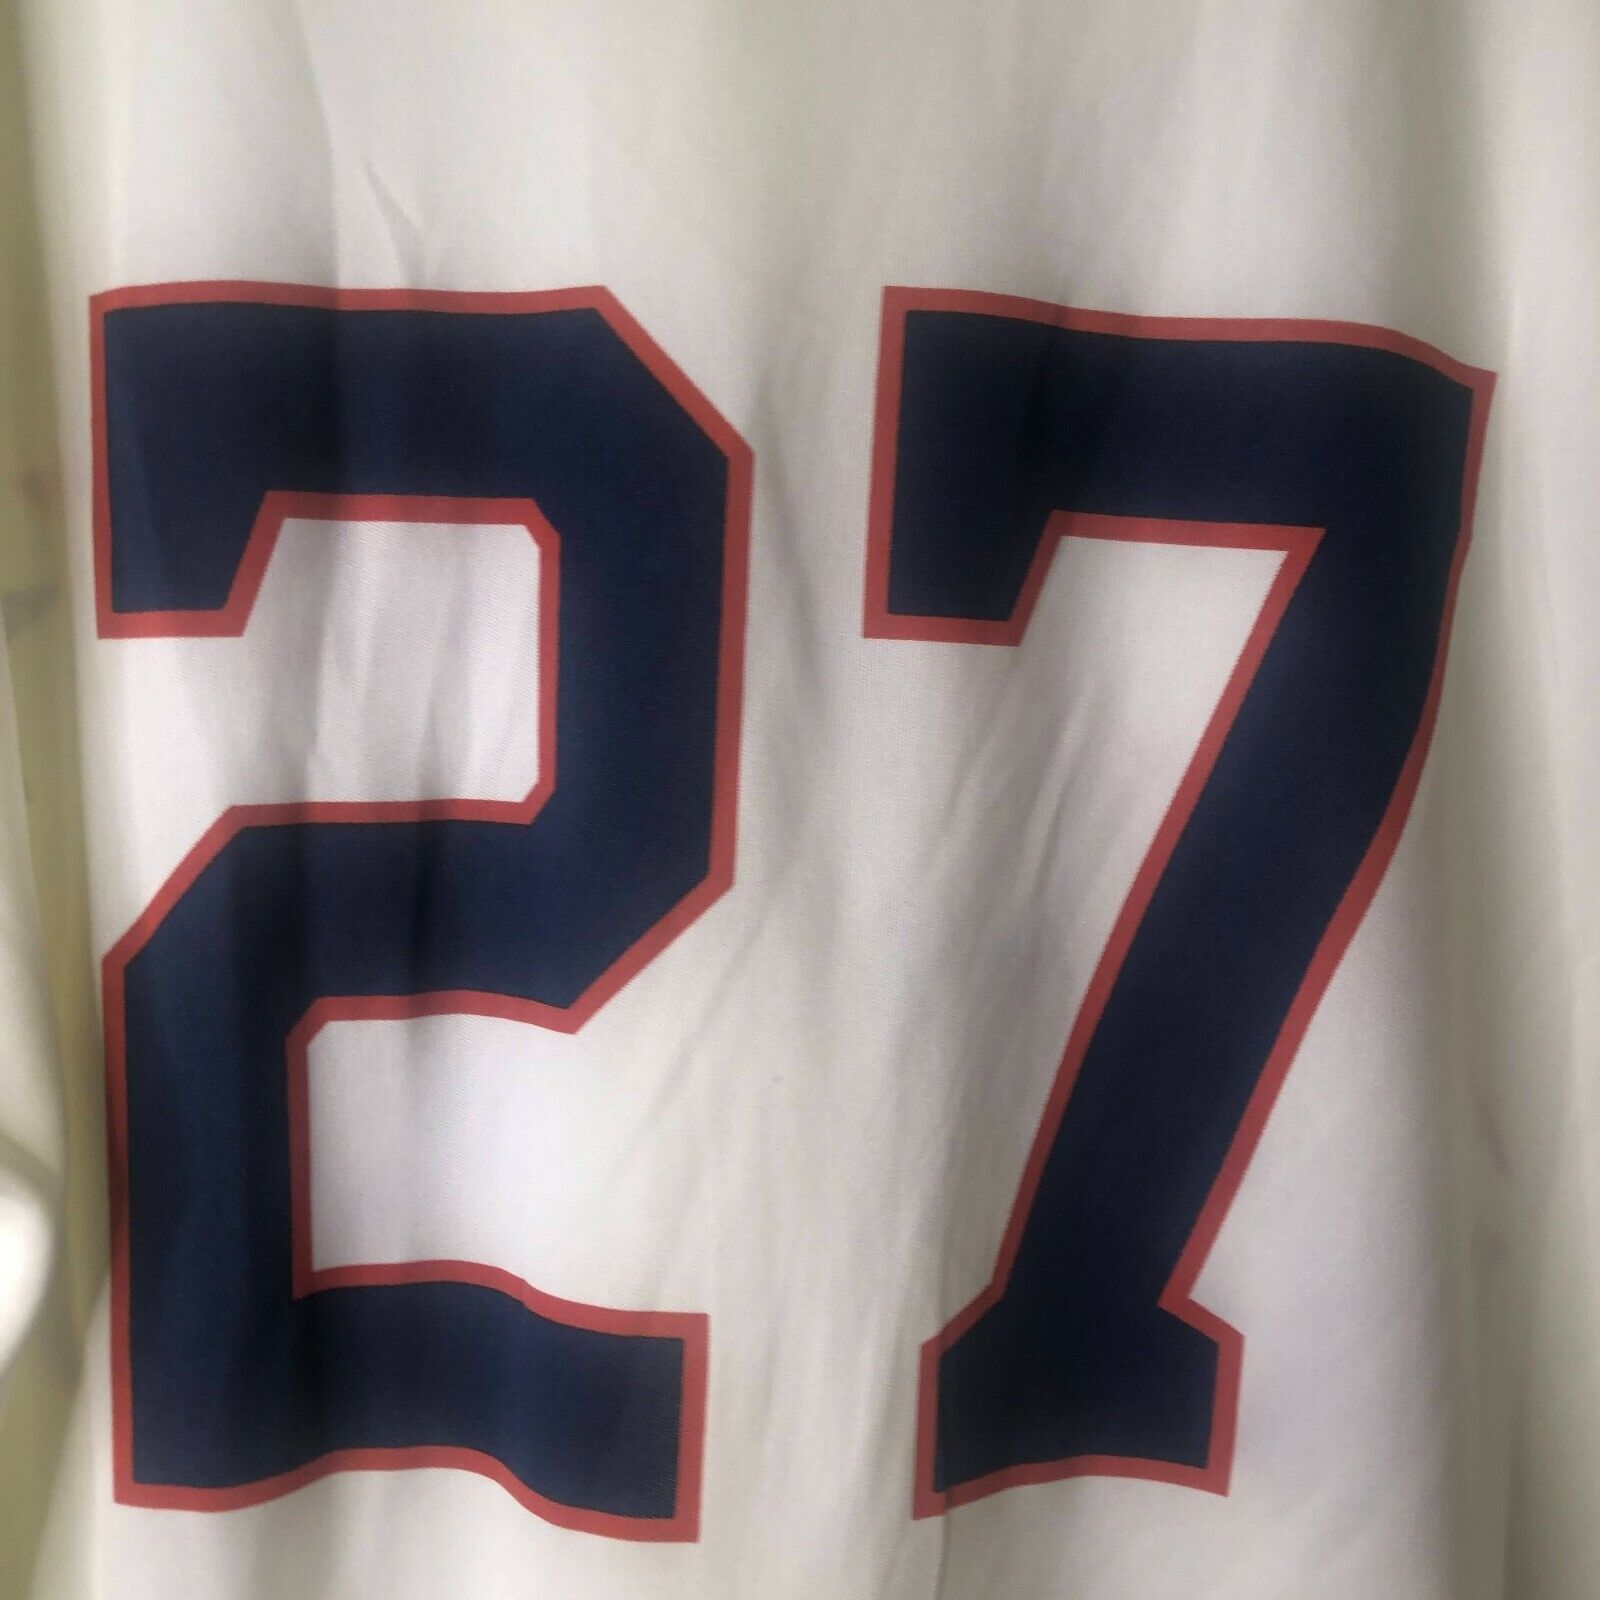 Houston Astros #27 Jose Altuve 1979 Rainbow Jersey on sale,for  Cheap,wholesale from China